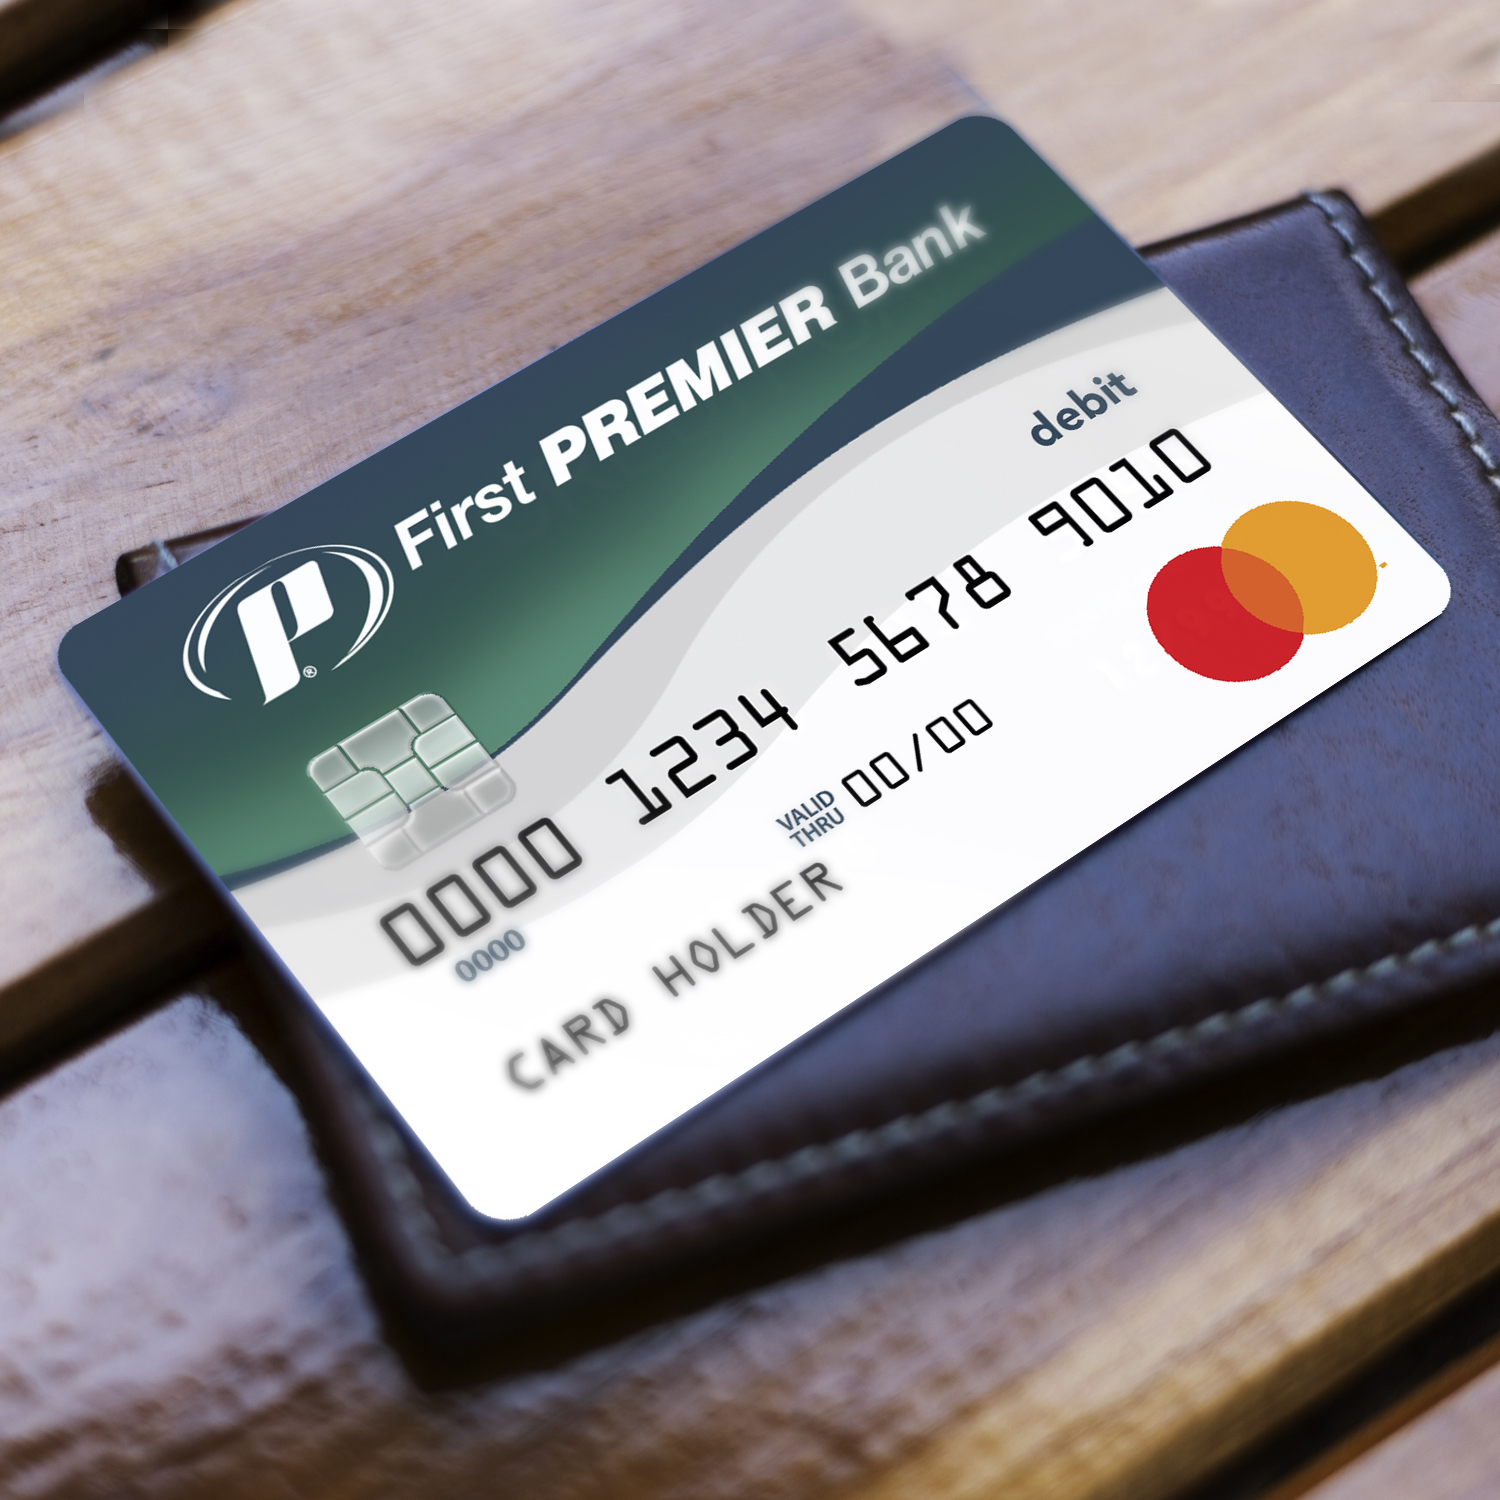 First Premier Bank Secured Credit Card / The 4 Worst